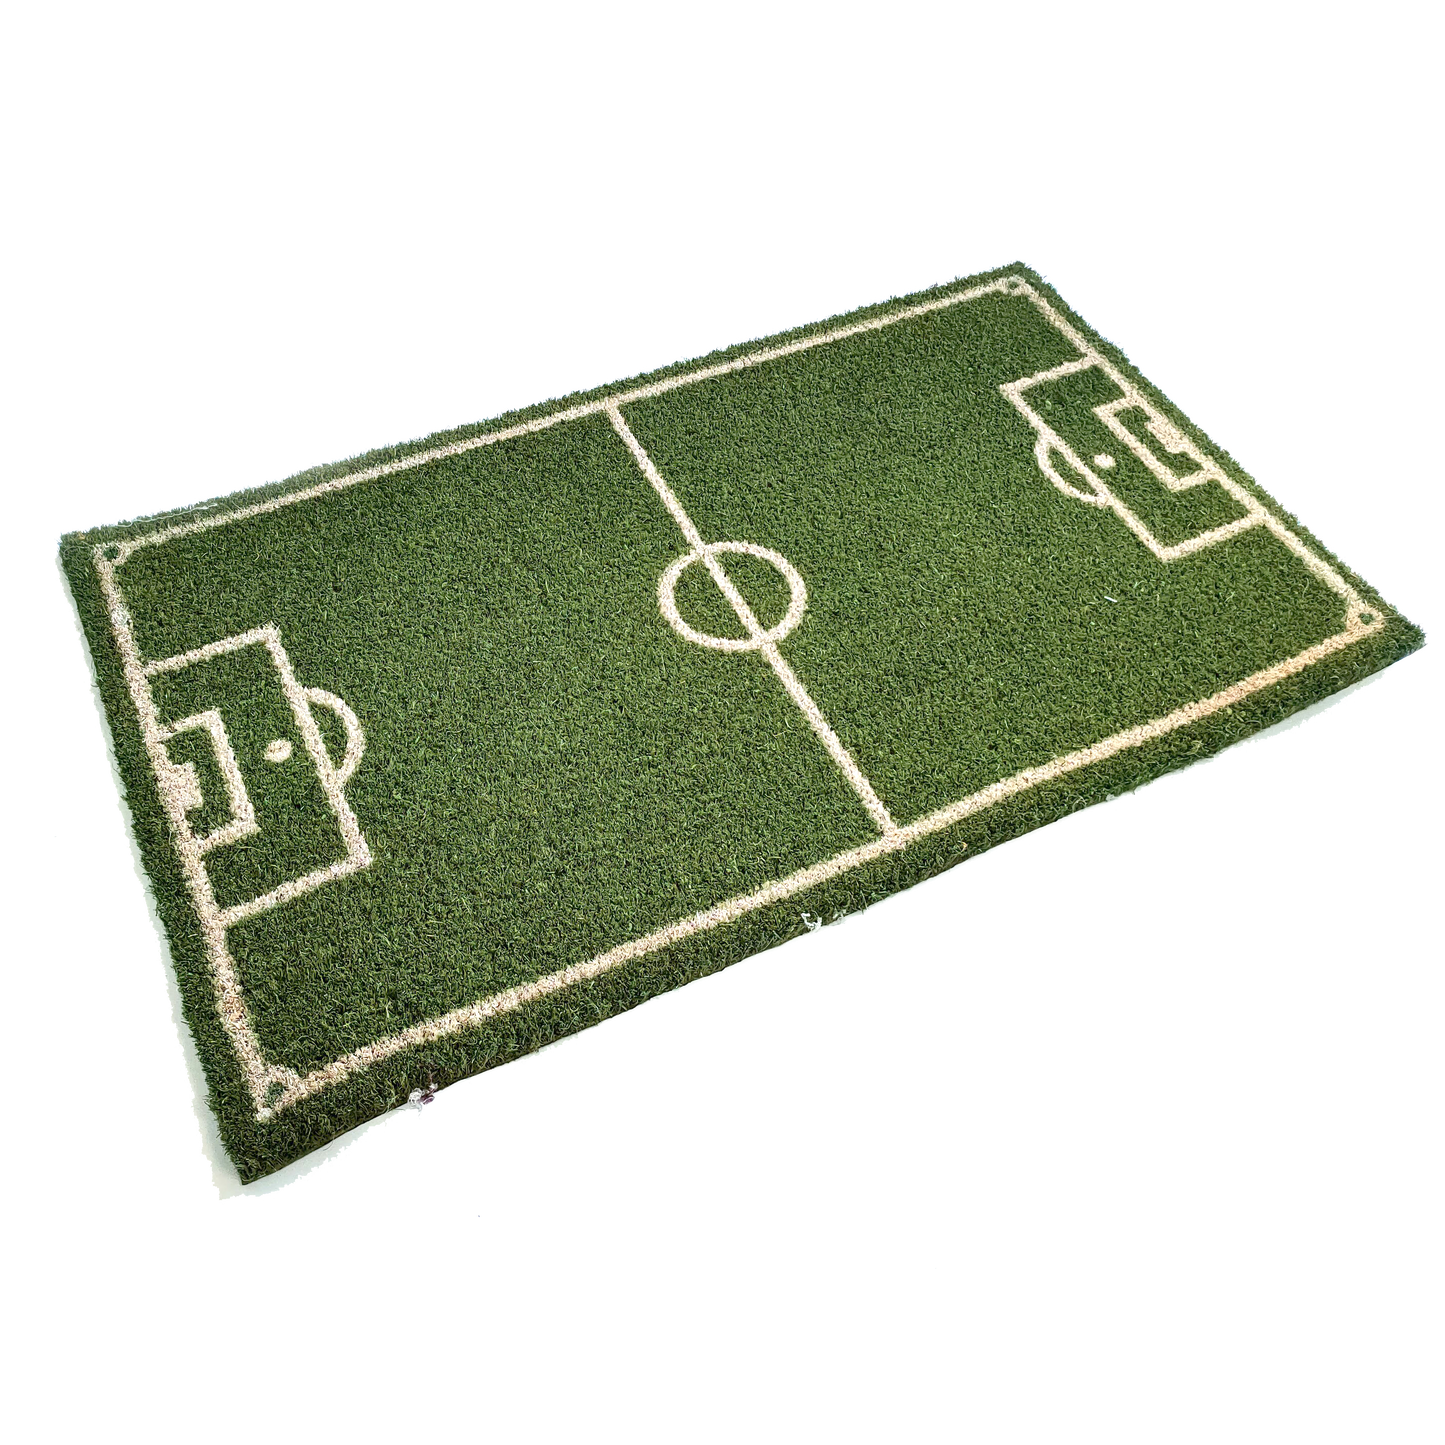 Green Football Pitch Coir Door Mat | 75cm x 45cm | Durable, Slip-Resistant, and Eco-Friendly.